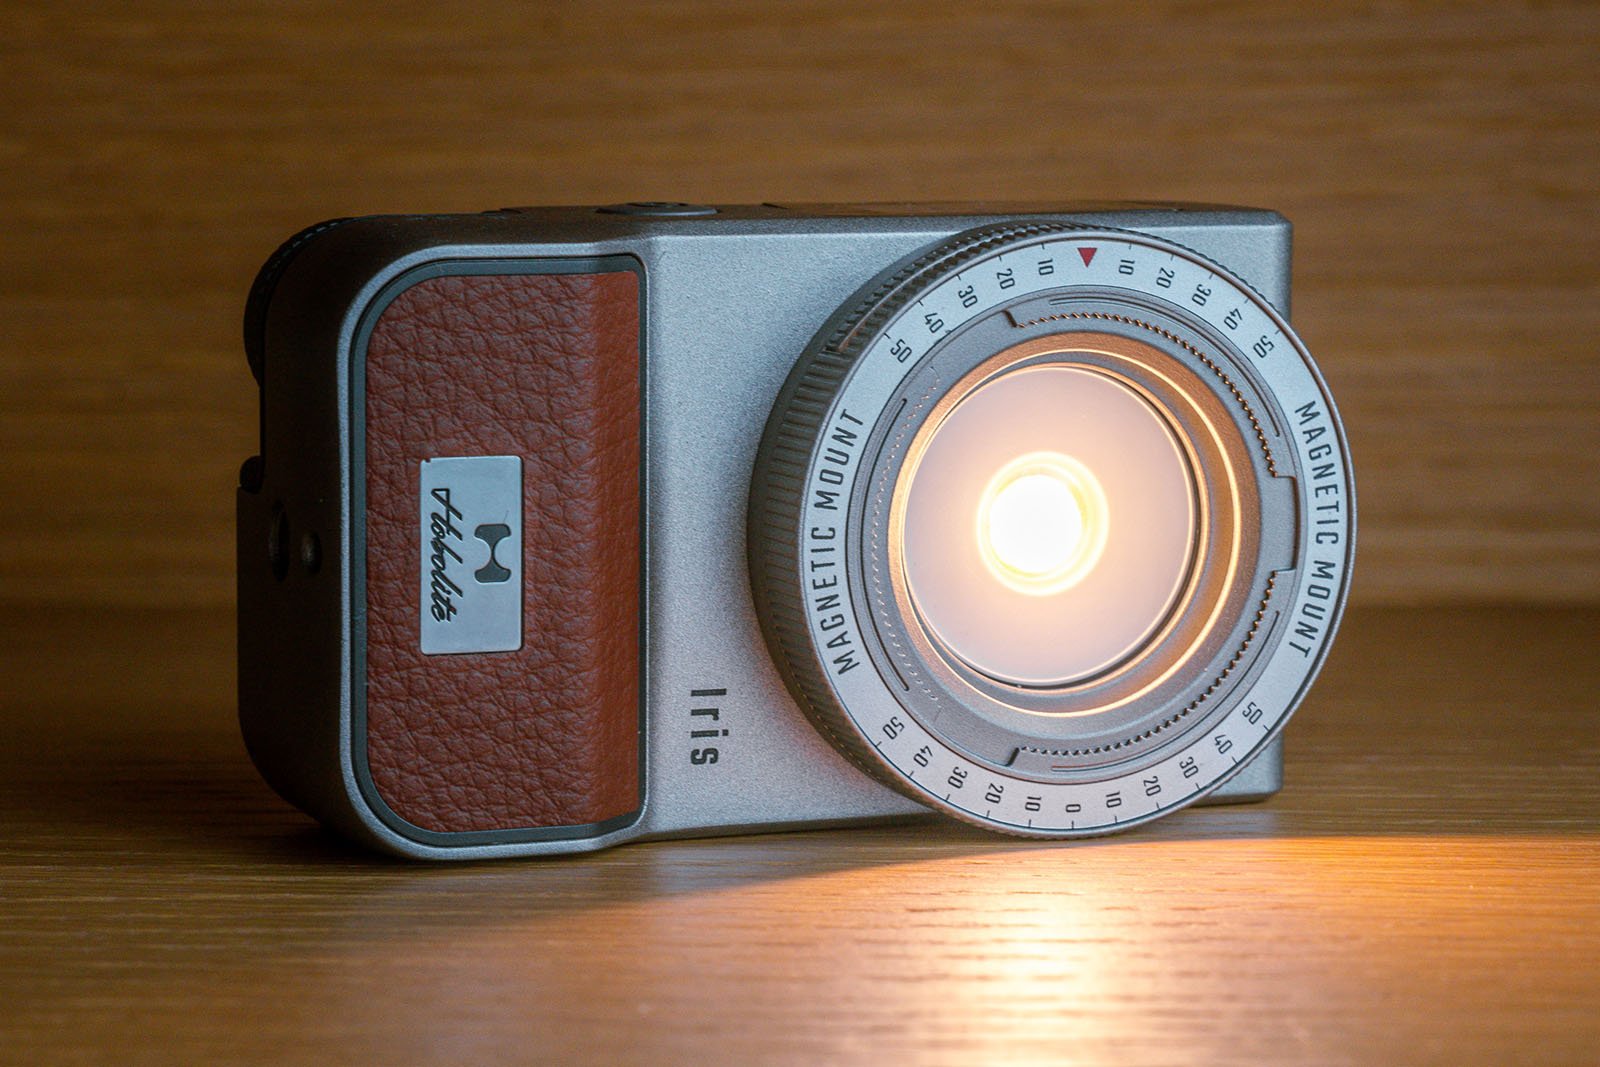 A retro-style camera with a prominent, illuminated lens, labeled "MAGNETIC MOUNT" around the lens ring. The camera has a silver body with a brown leather-like textured panel on the side, and is resting on a wooden surface.